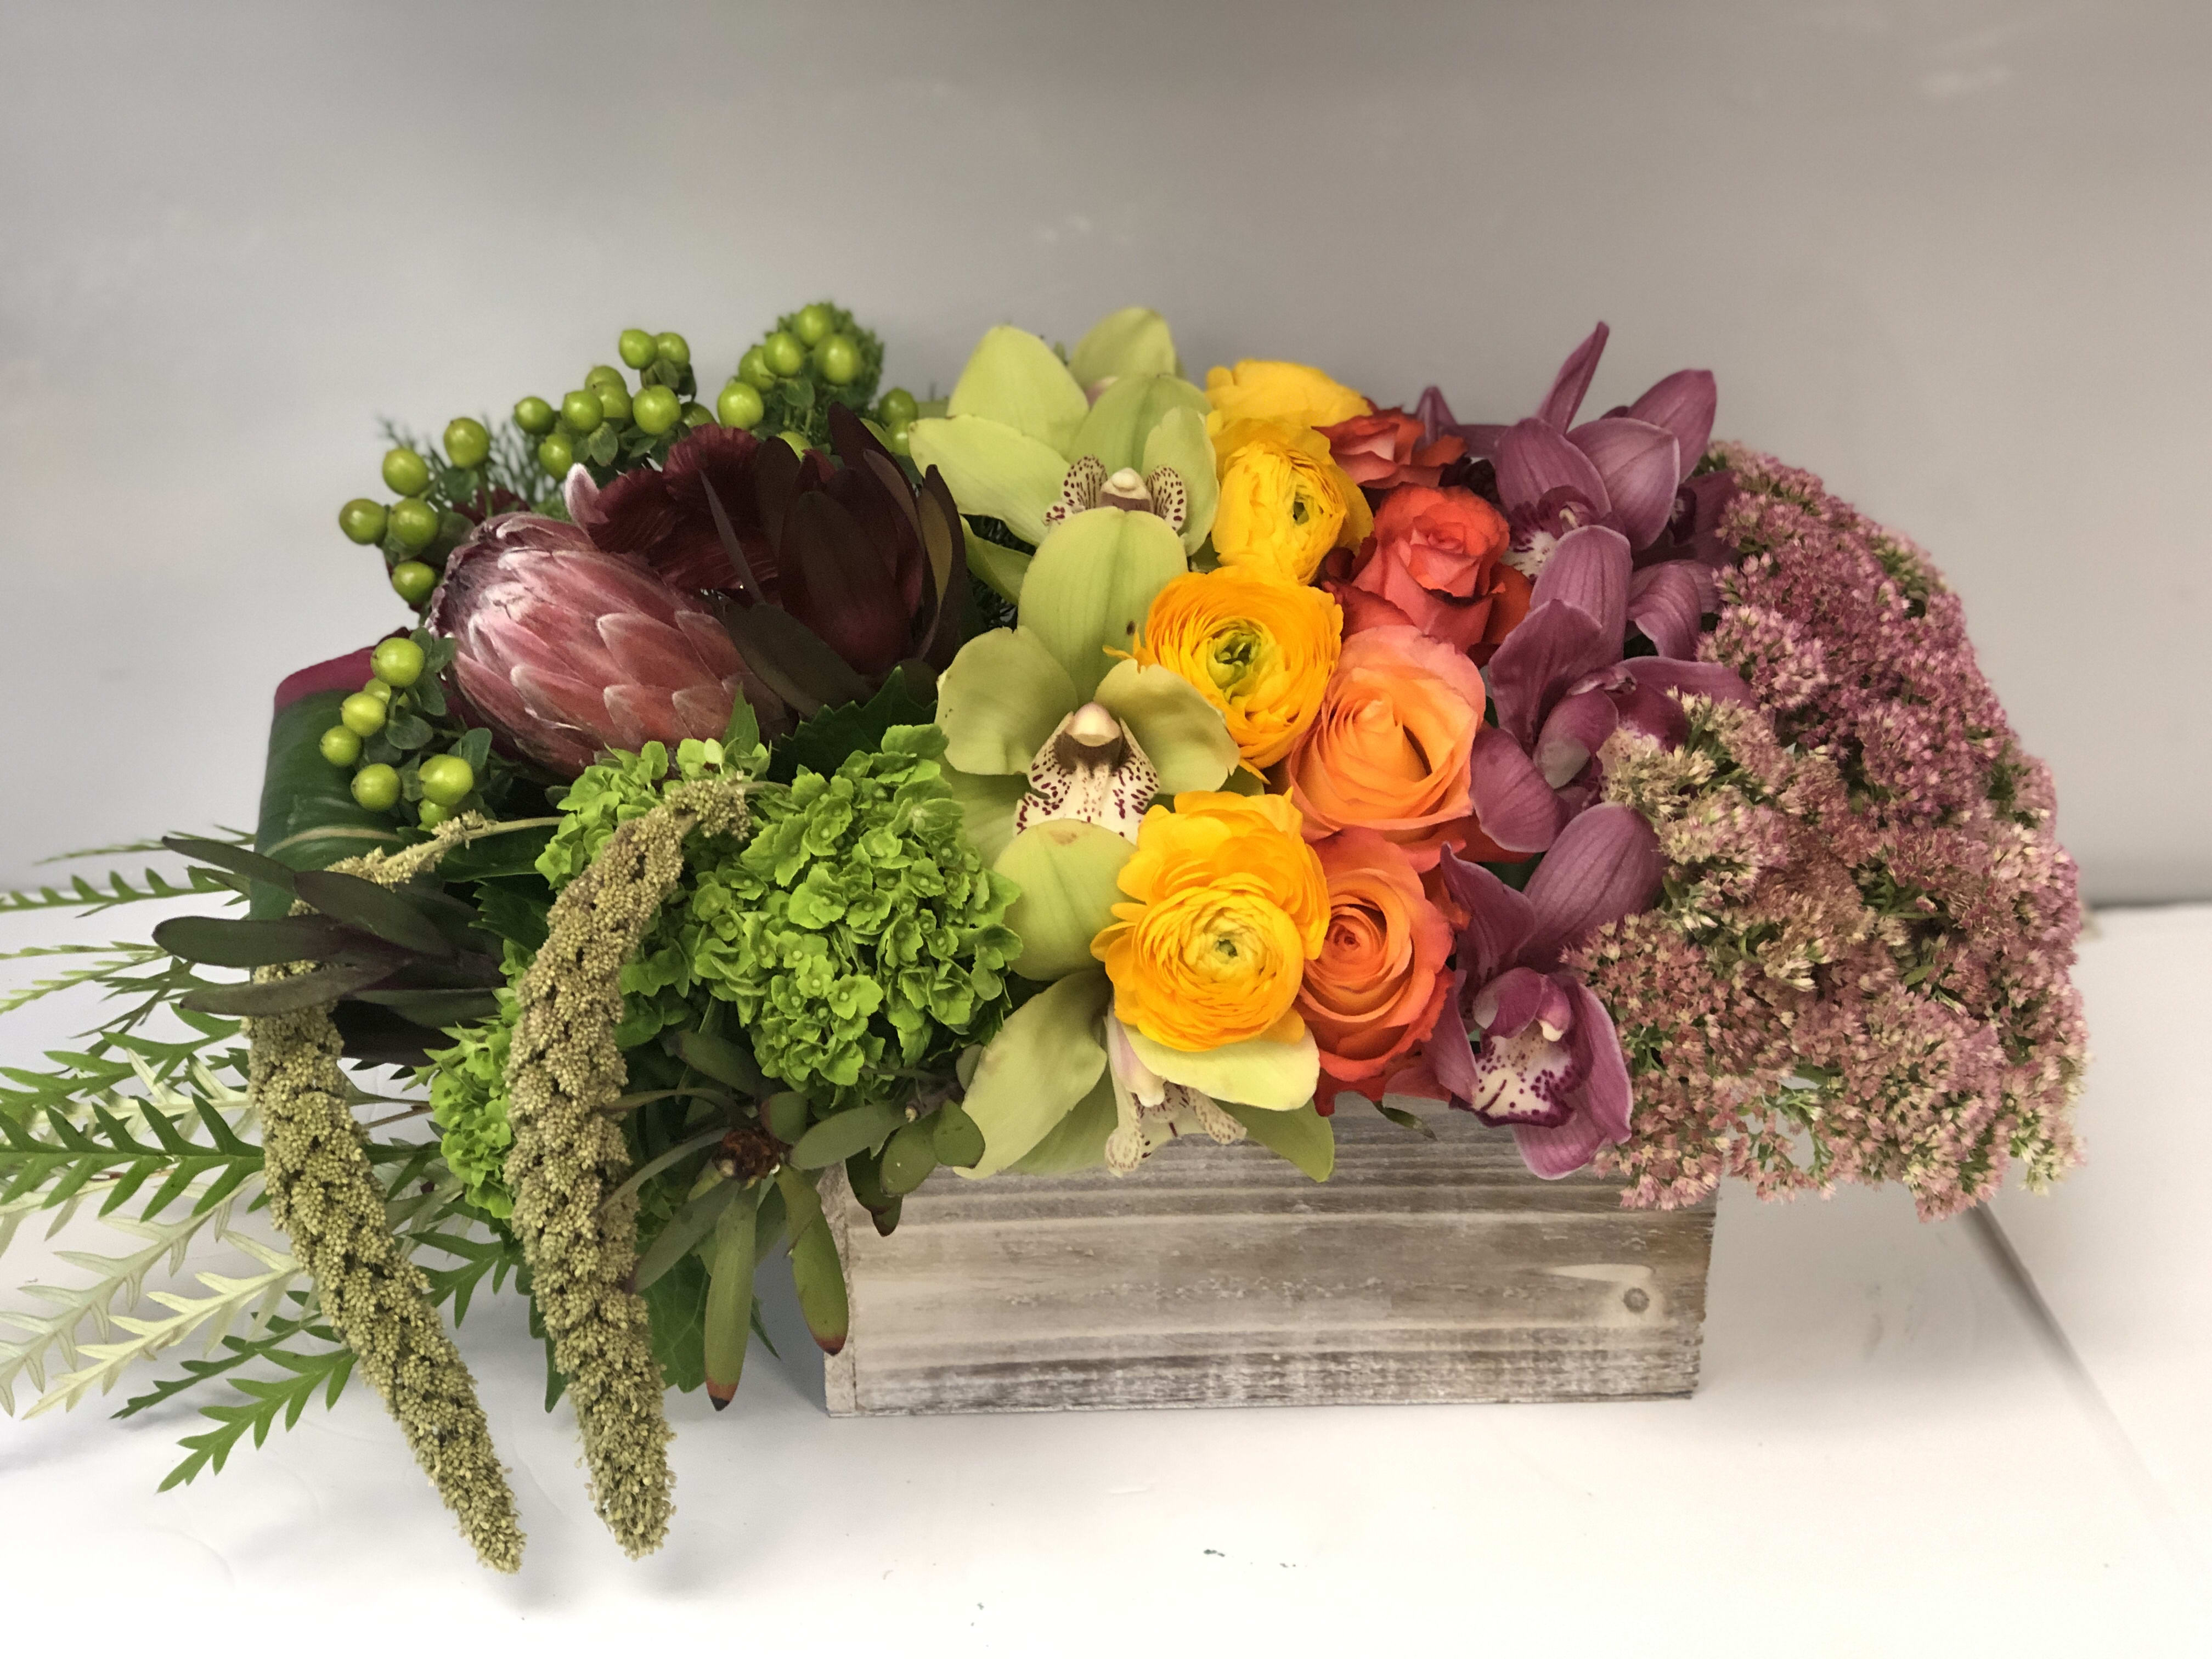 Art with tropical flowers  - Wooden rustic box with shades of colors of orchids ranunculus mini green hydrengeas and tropical flowers 